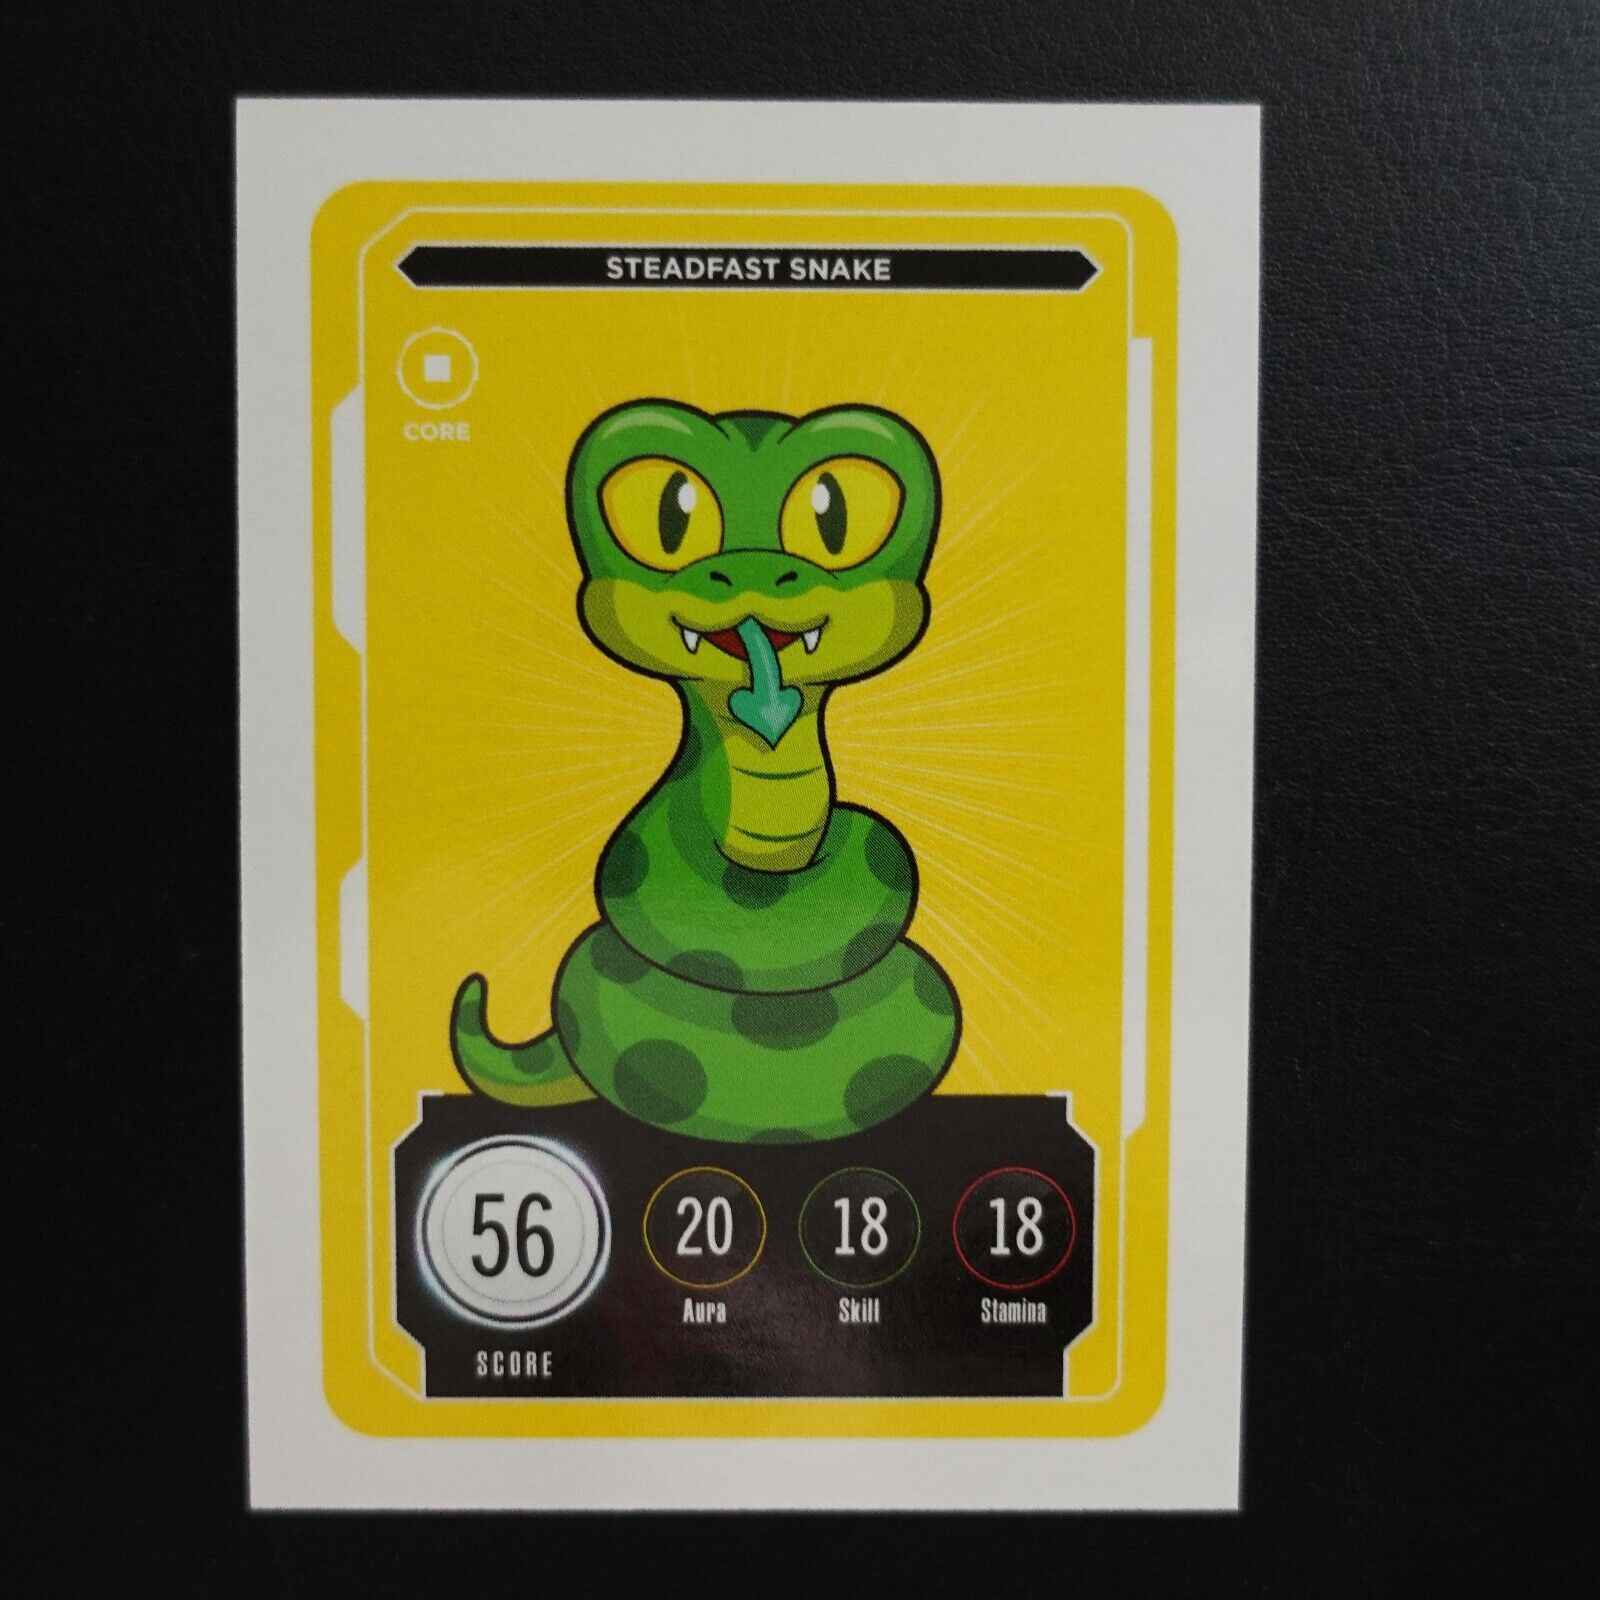 Steadfast Snake Veefriends Compete And Collect Series 2 Trading Card Gary Vee